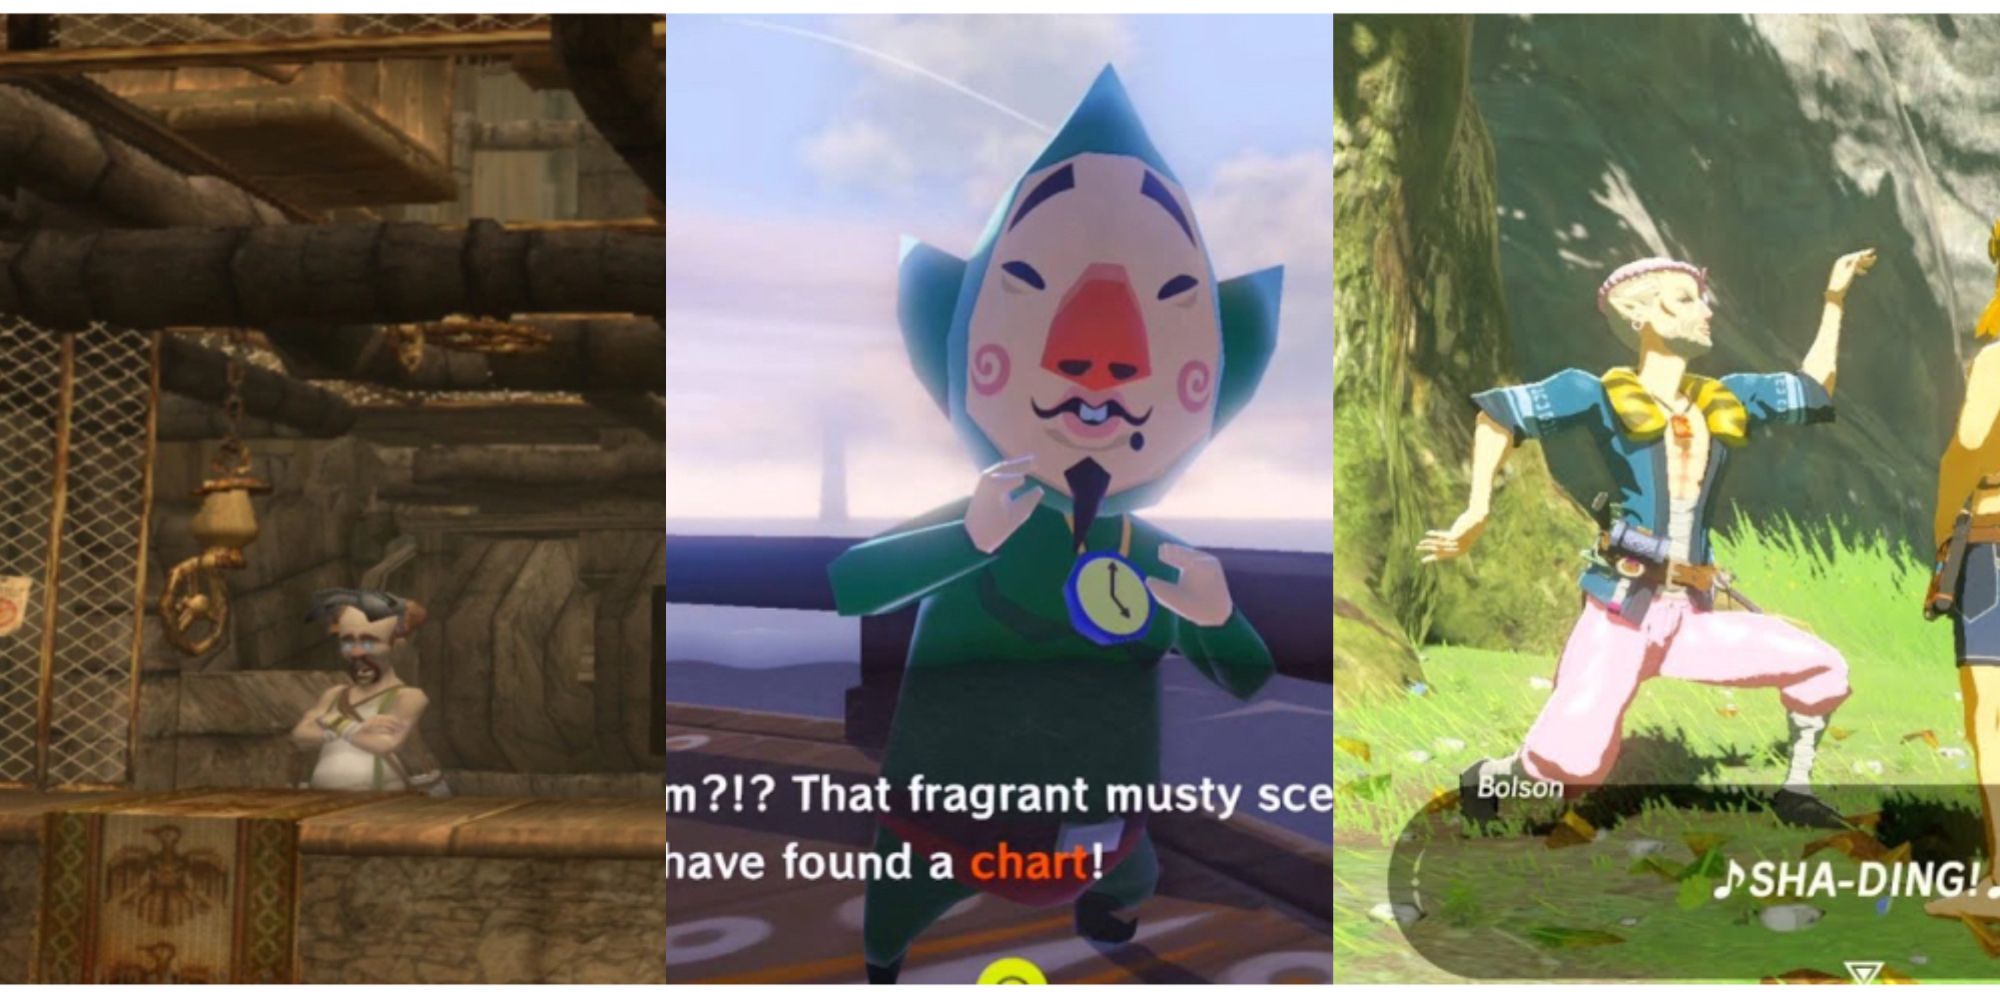 split image of Barnes, Tingle, and Bolson from The Legend of Zelda franchise